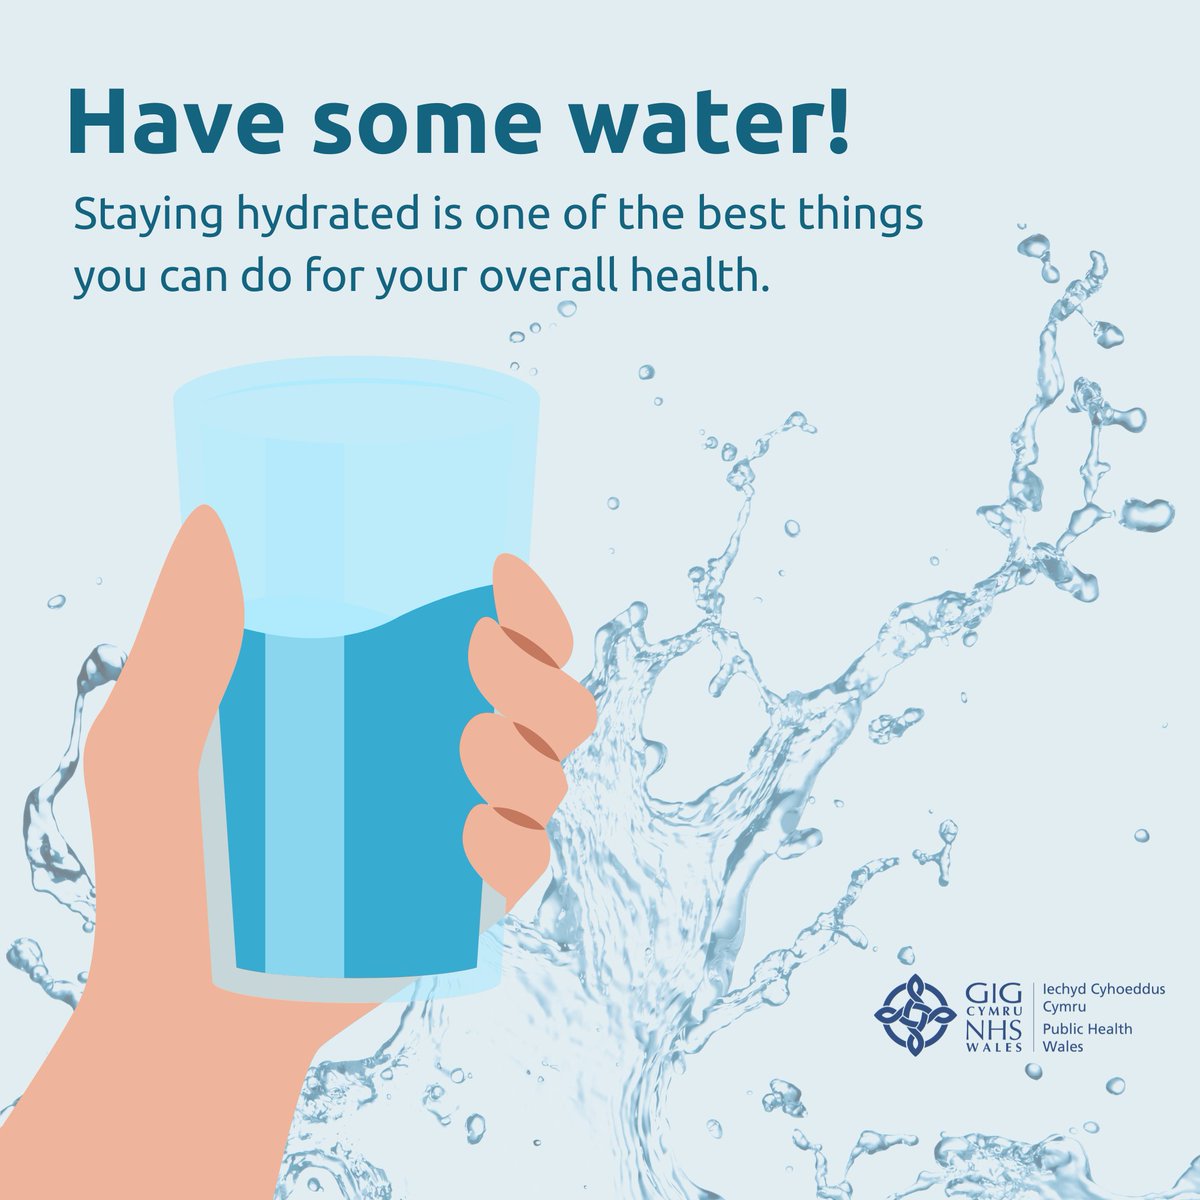 Stop scrolling! Have some water! 💧 During Health And Nutrition Week remember that staying hydrated is essential for optimal bodily functions. Keep a water bottle handy and sip regularly throughout the day. Aim to drink 6–8 glasses of water per day. So, take a sip now! #HNWeek